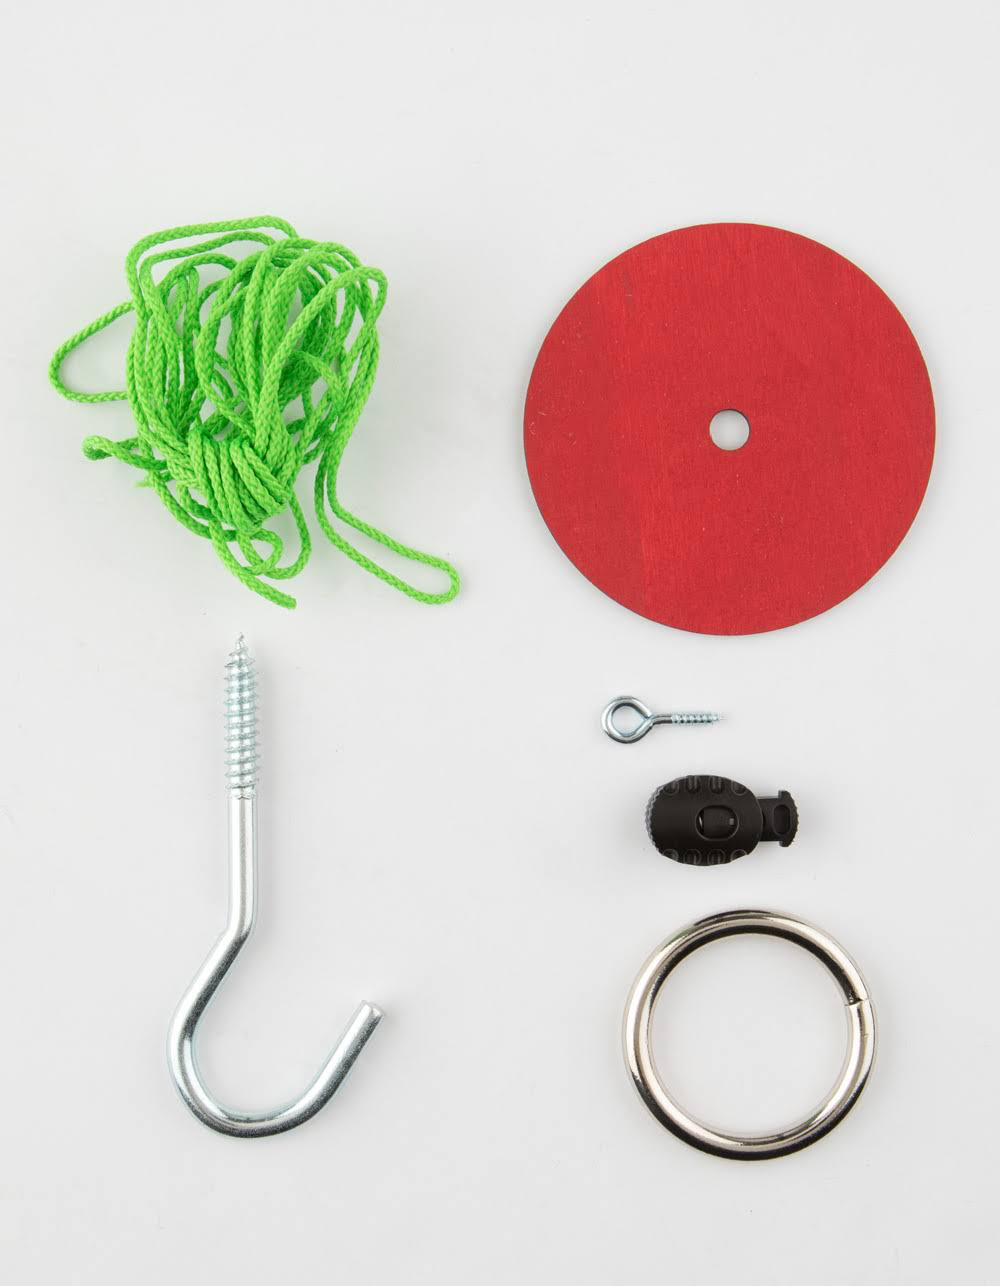 Image of included materials in the Ring on a String Game.